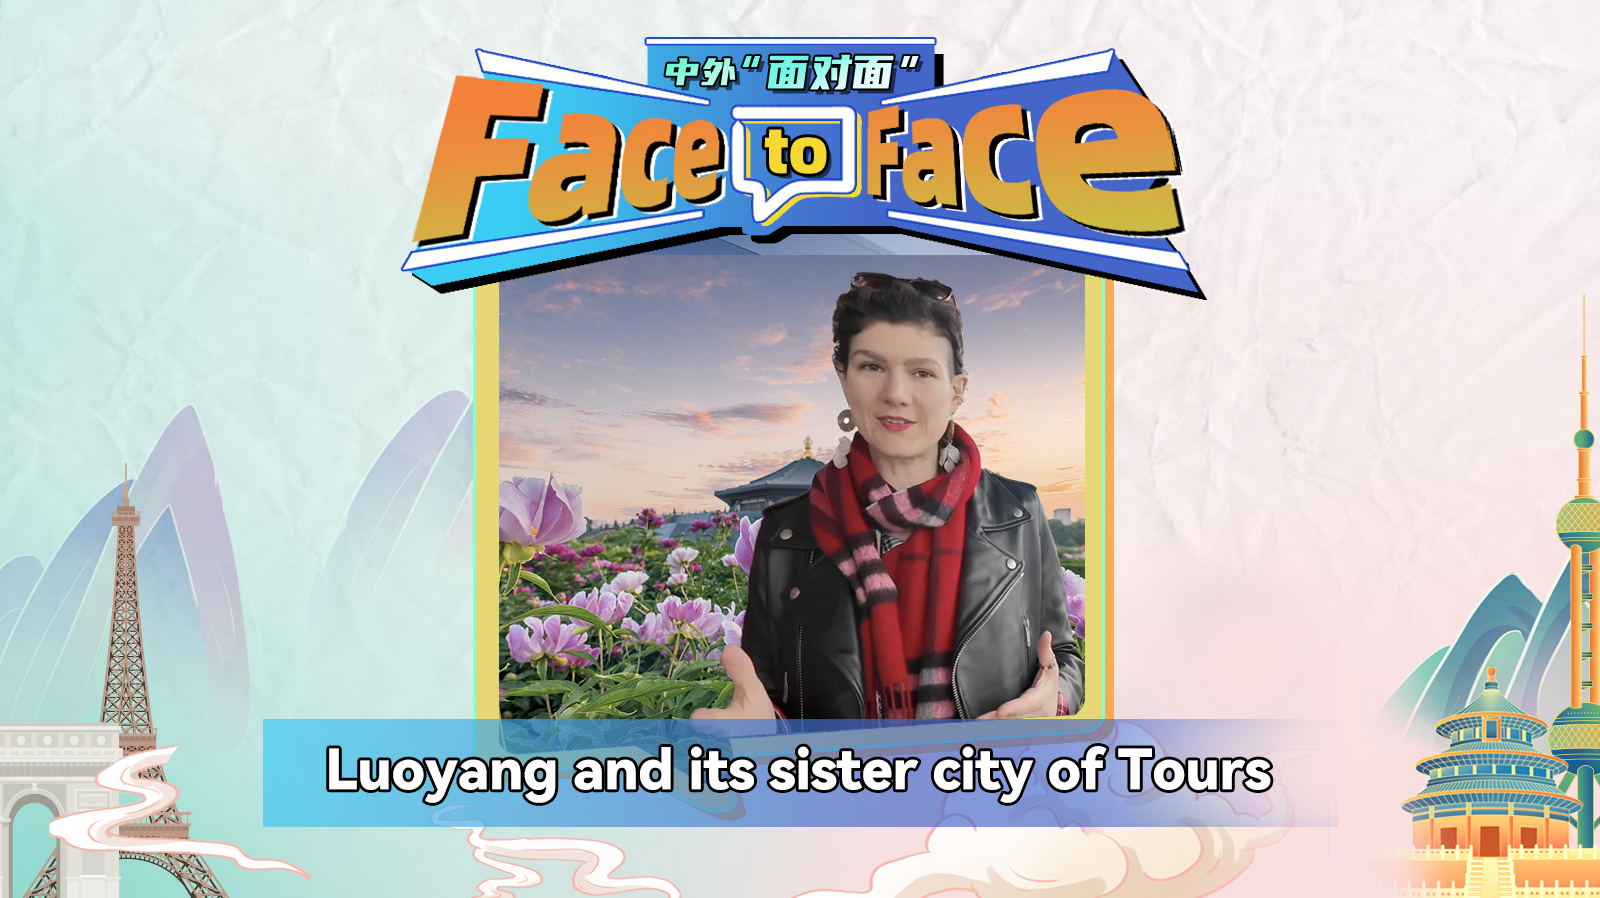 Face to Face: Luoyang and its sister city of Tours